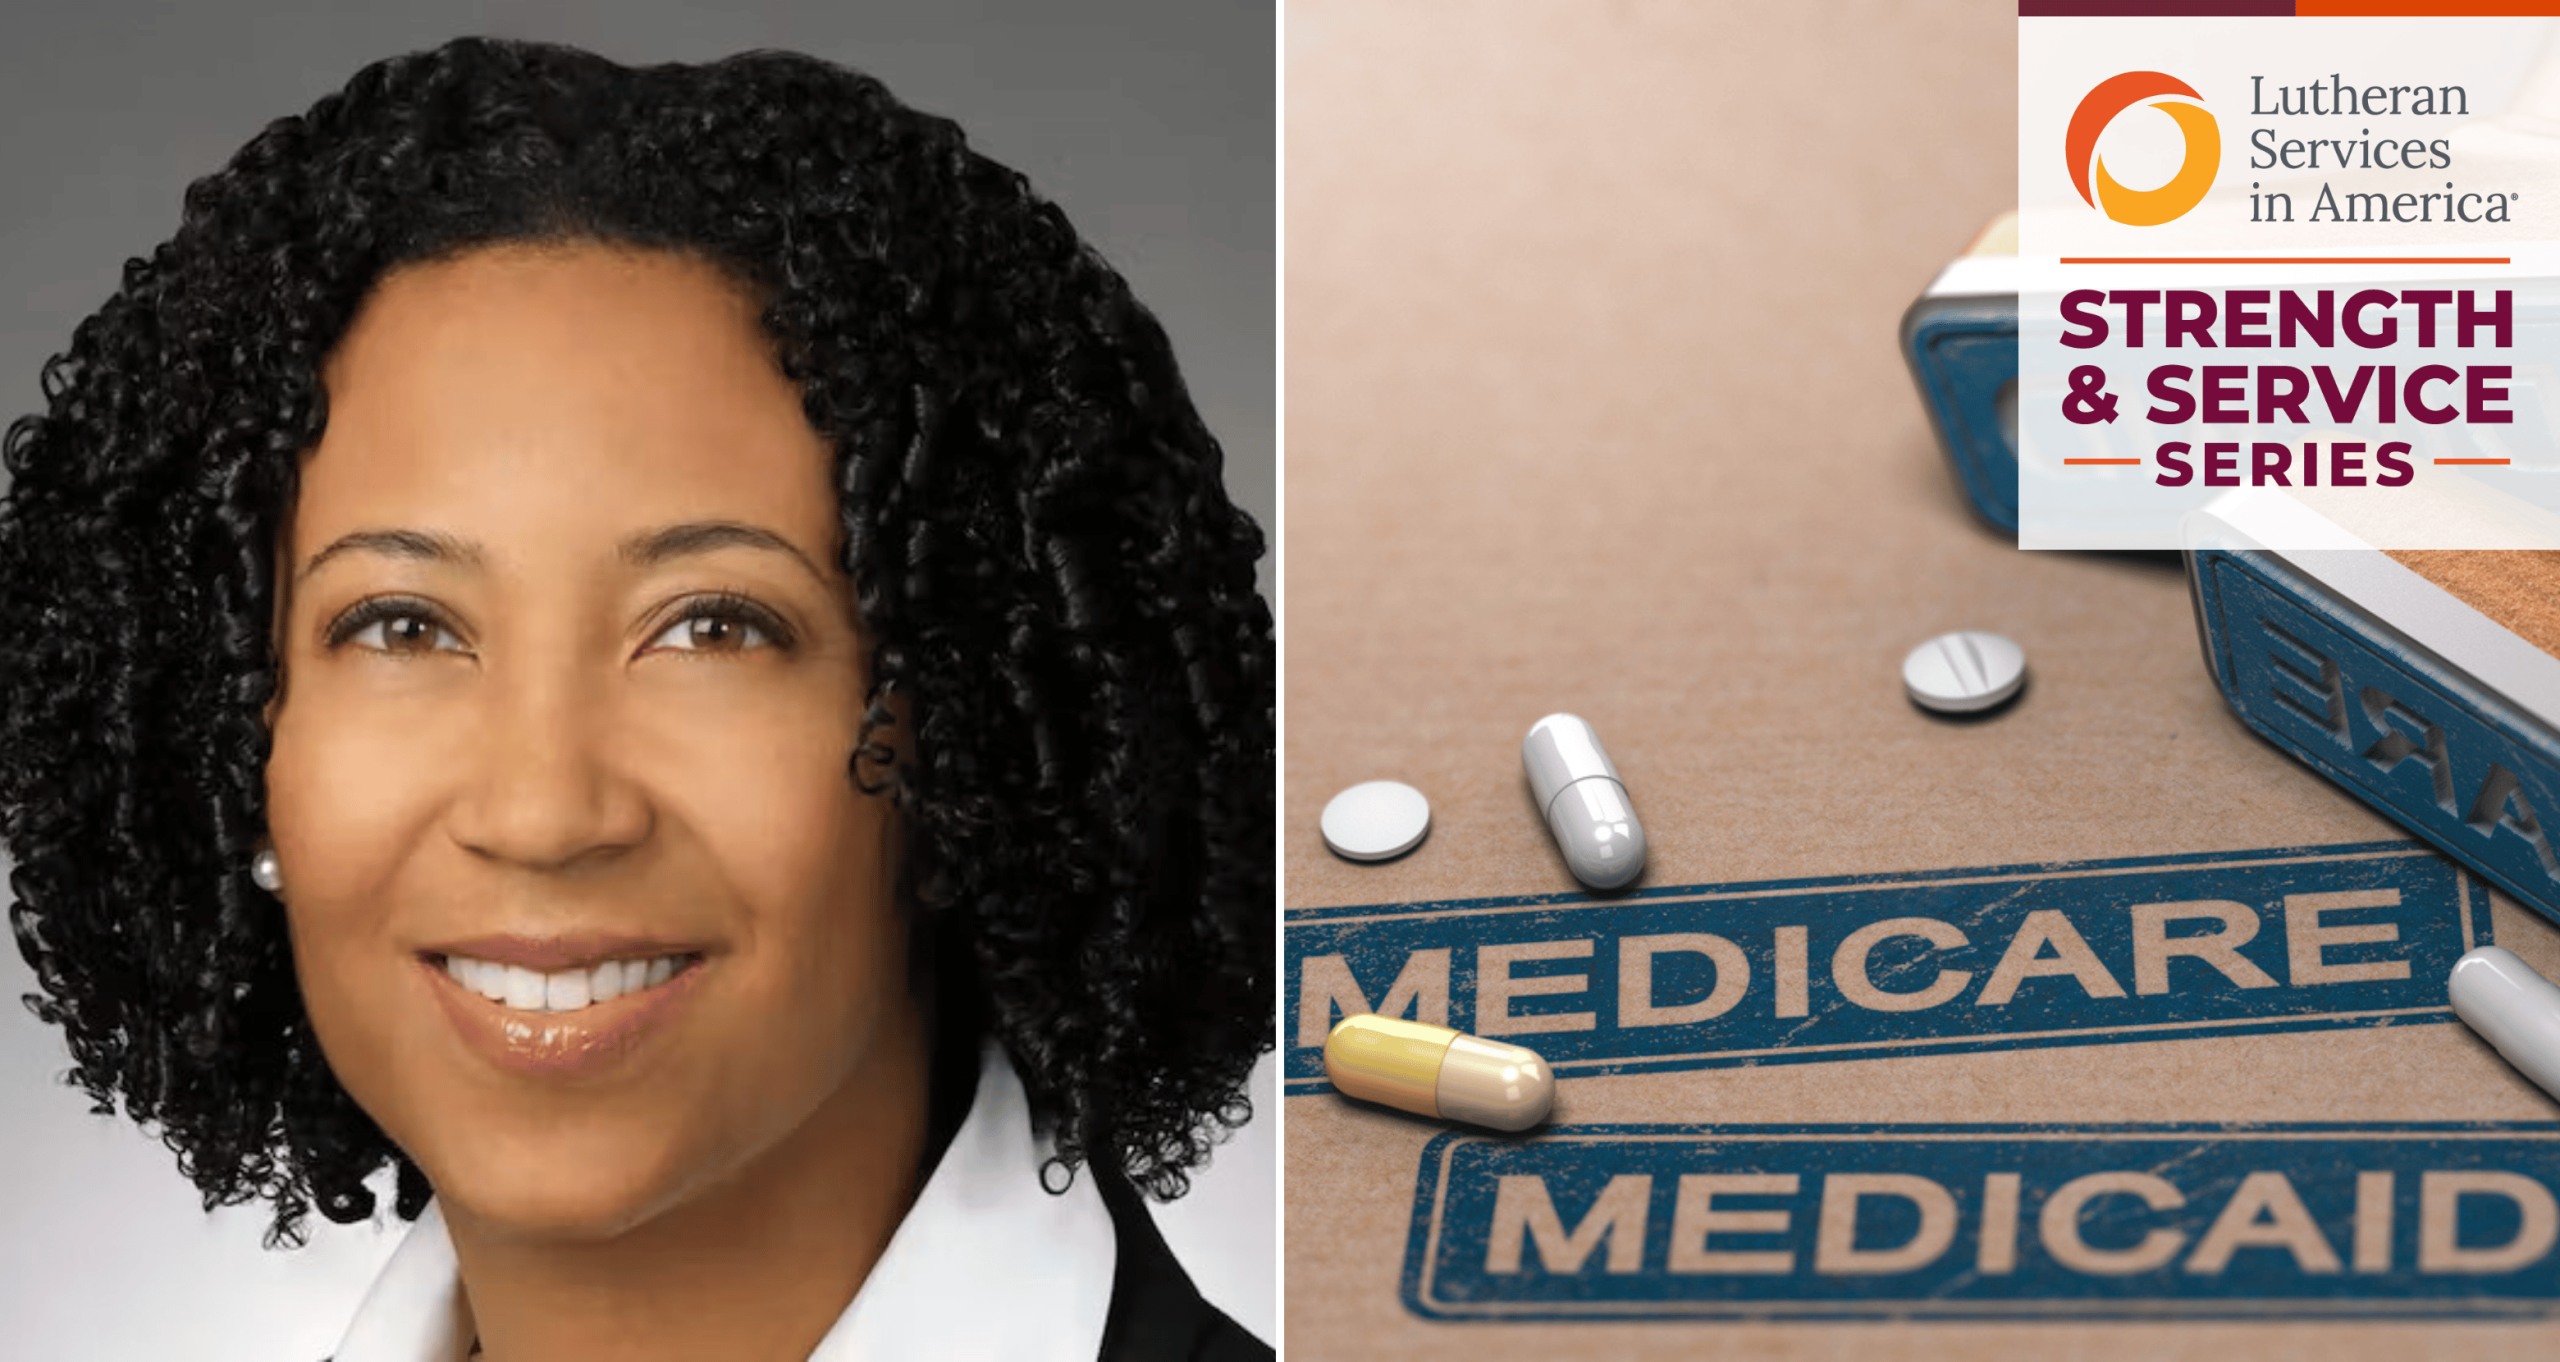 A Conversation with Dr. Dora Hughes, Centers for Medicare & Medicaid Services